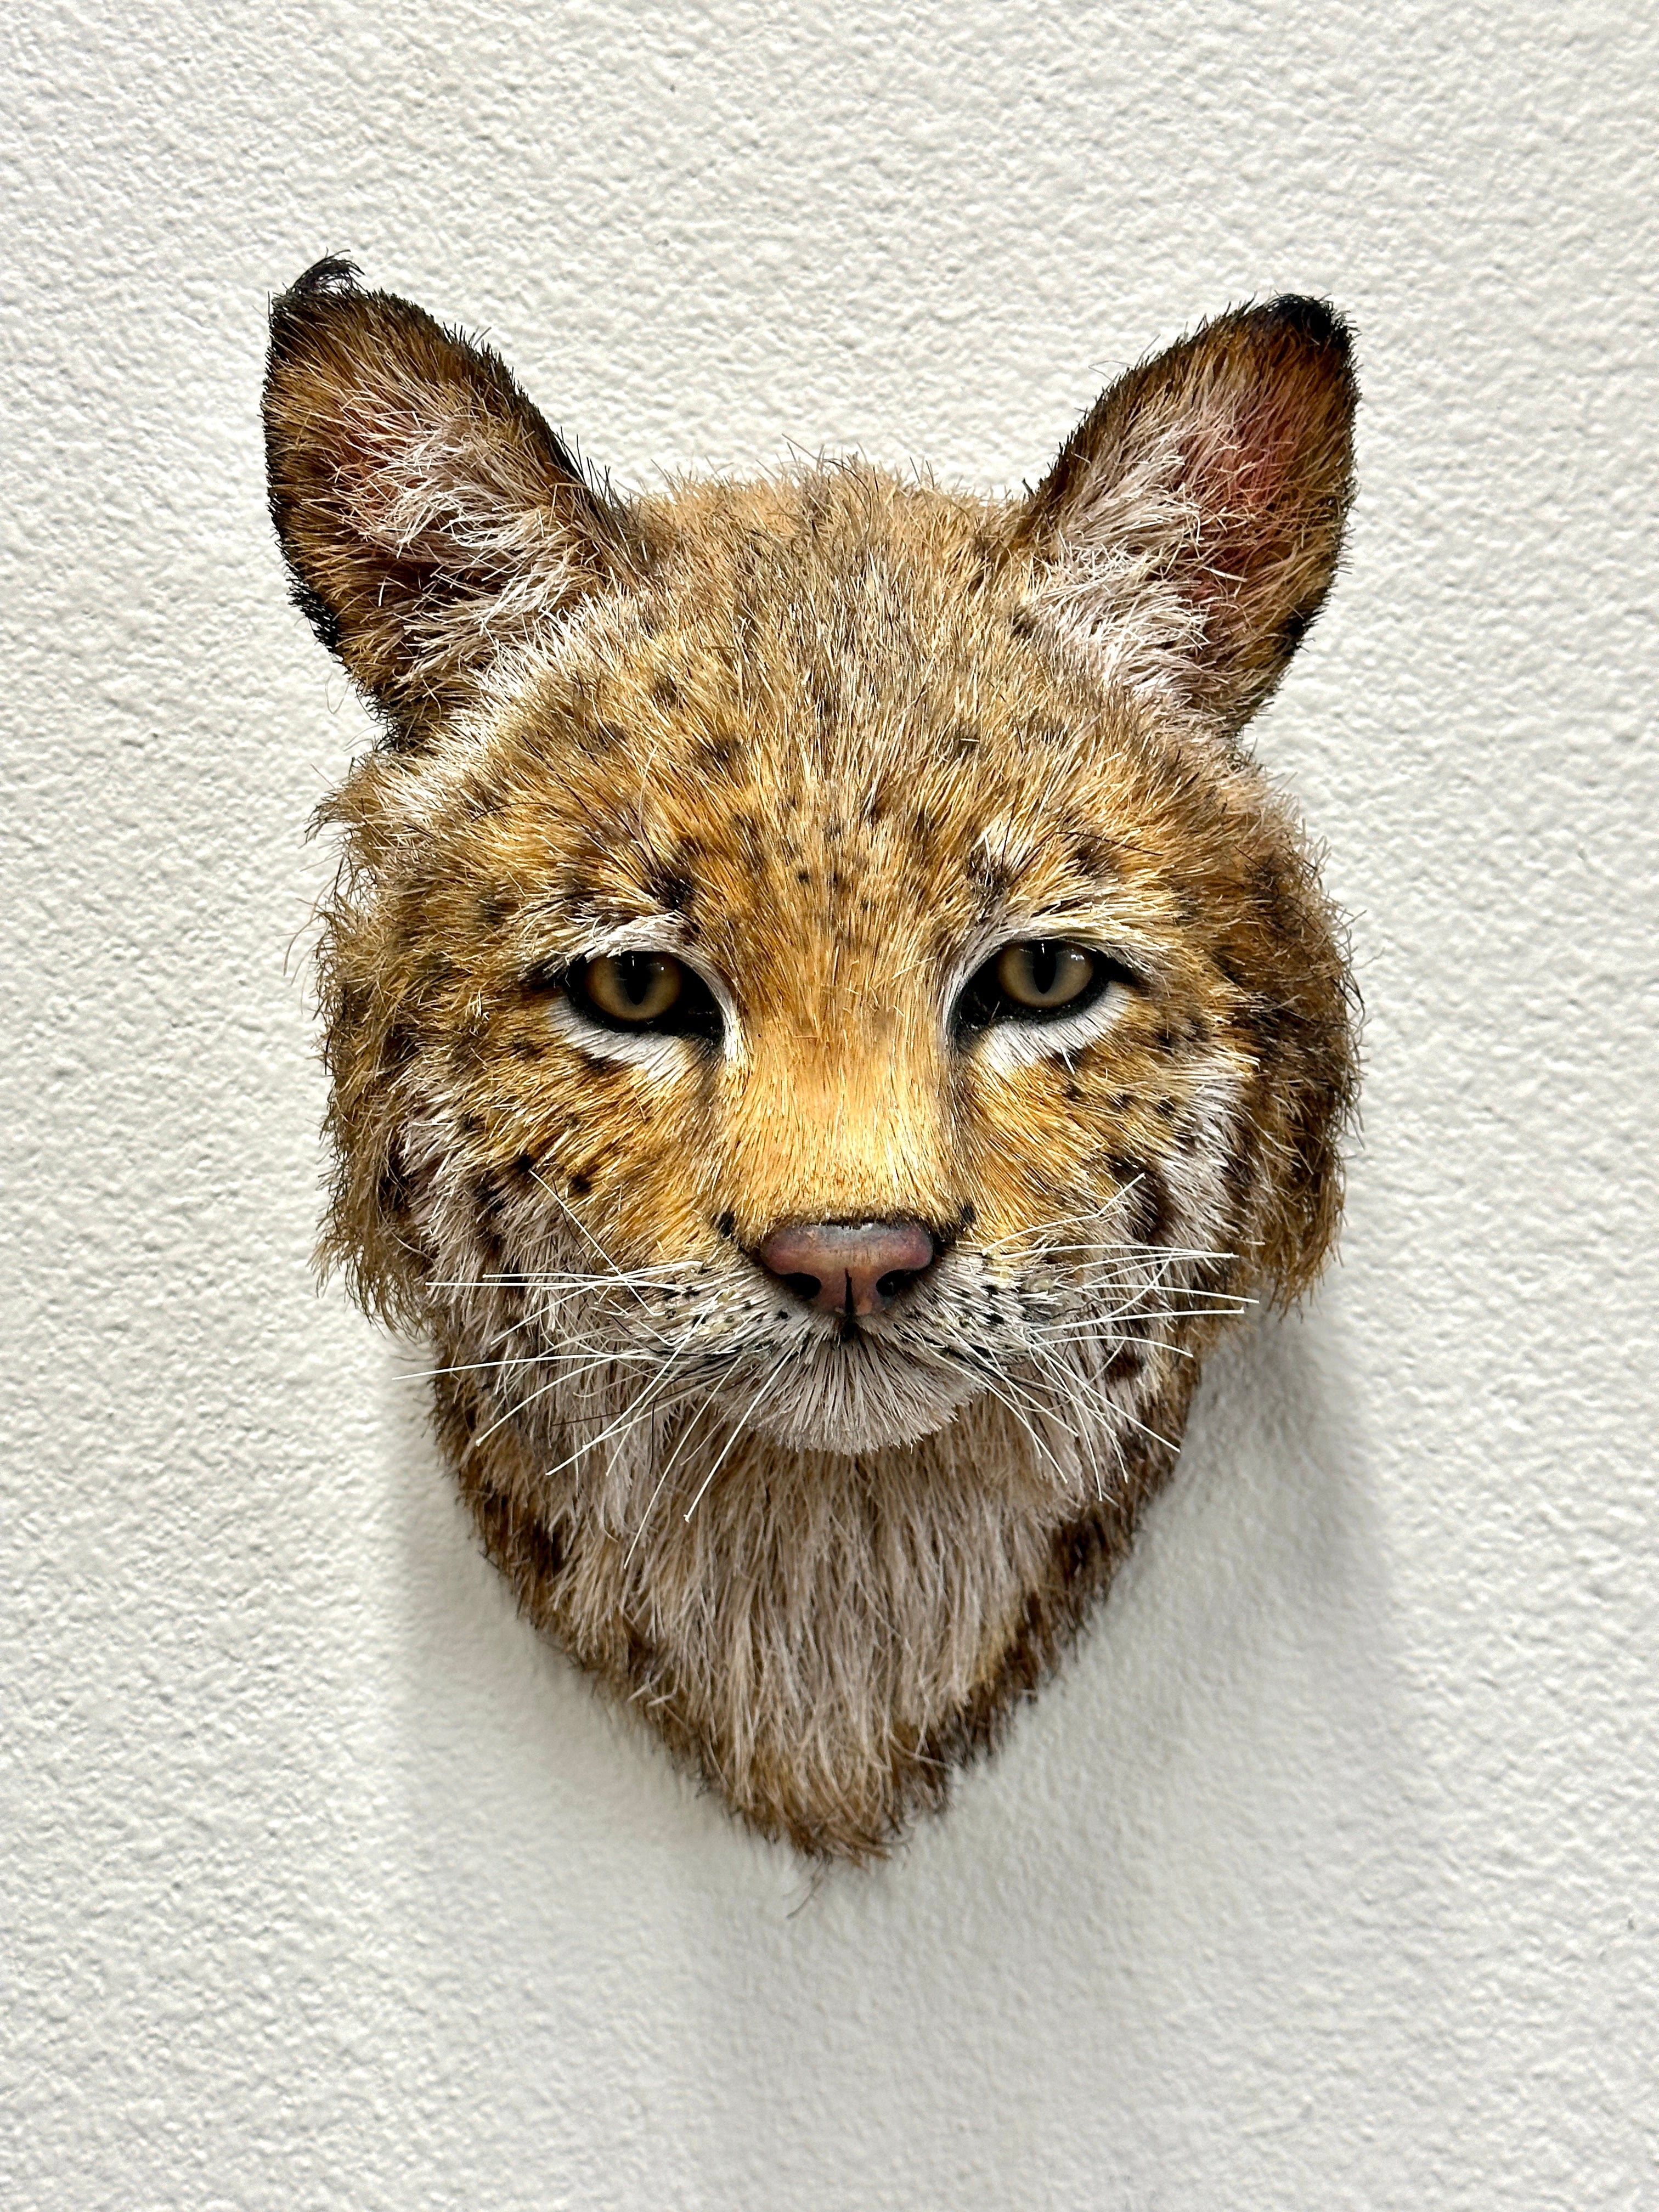 A wonderful wall sculpture by the noted artist Anne Andersson. It is signed and dated 2008 #2 on the back. These sculptures are made of Sisal Fiber from an Agave and meticulously hand painted. The eyes are hand blown glass. the bodies are sculpted